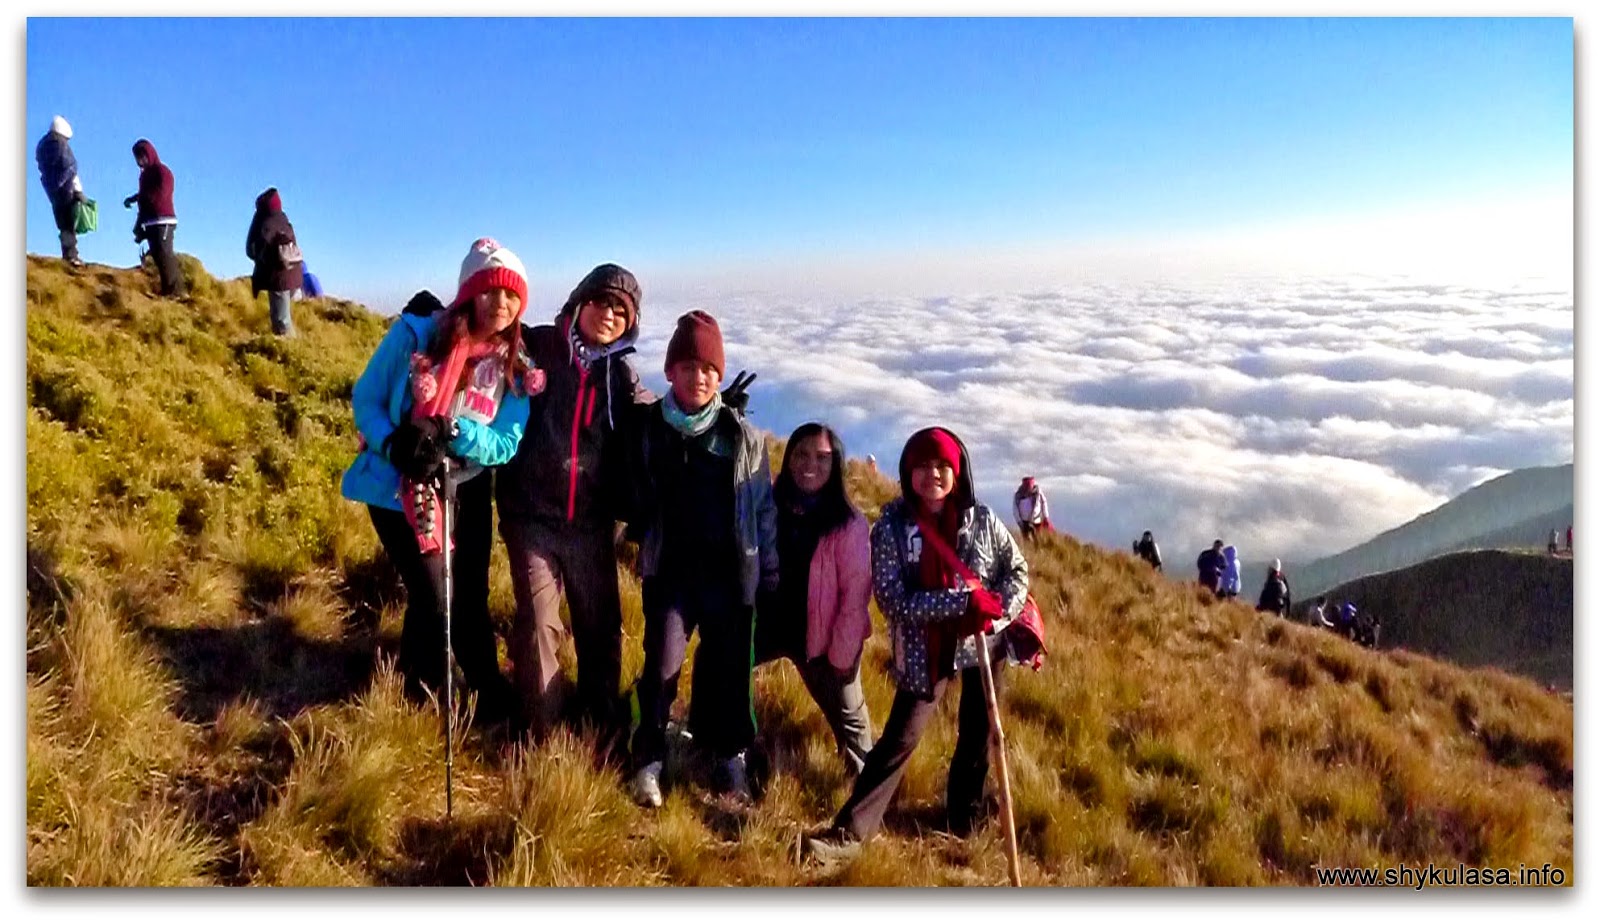 Sea of Clouds, Mt Pulag